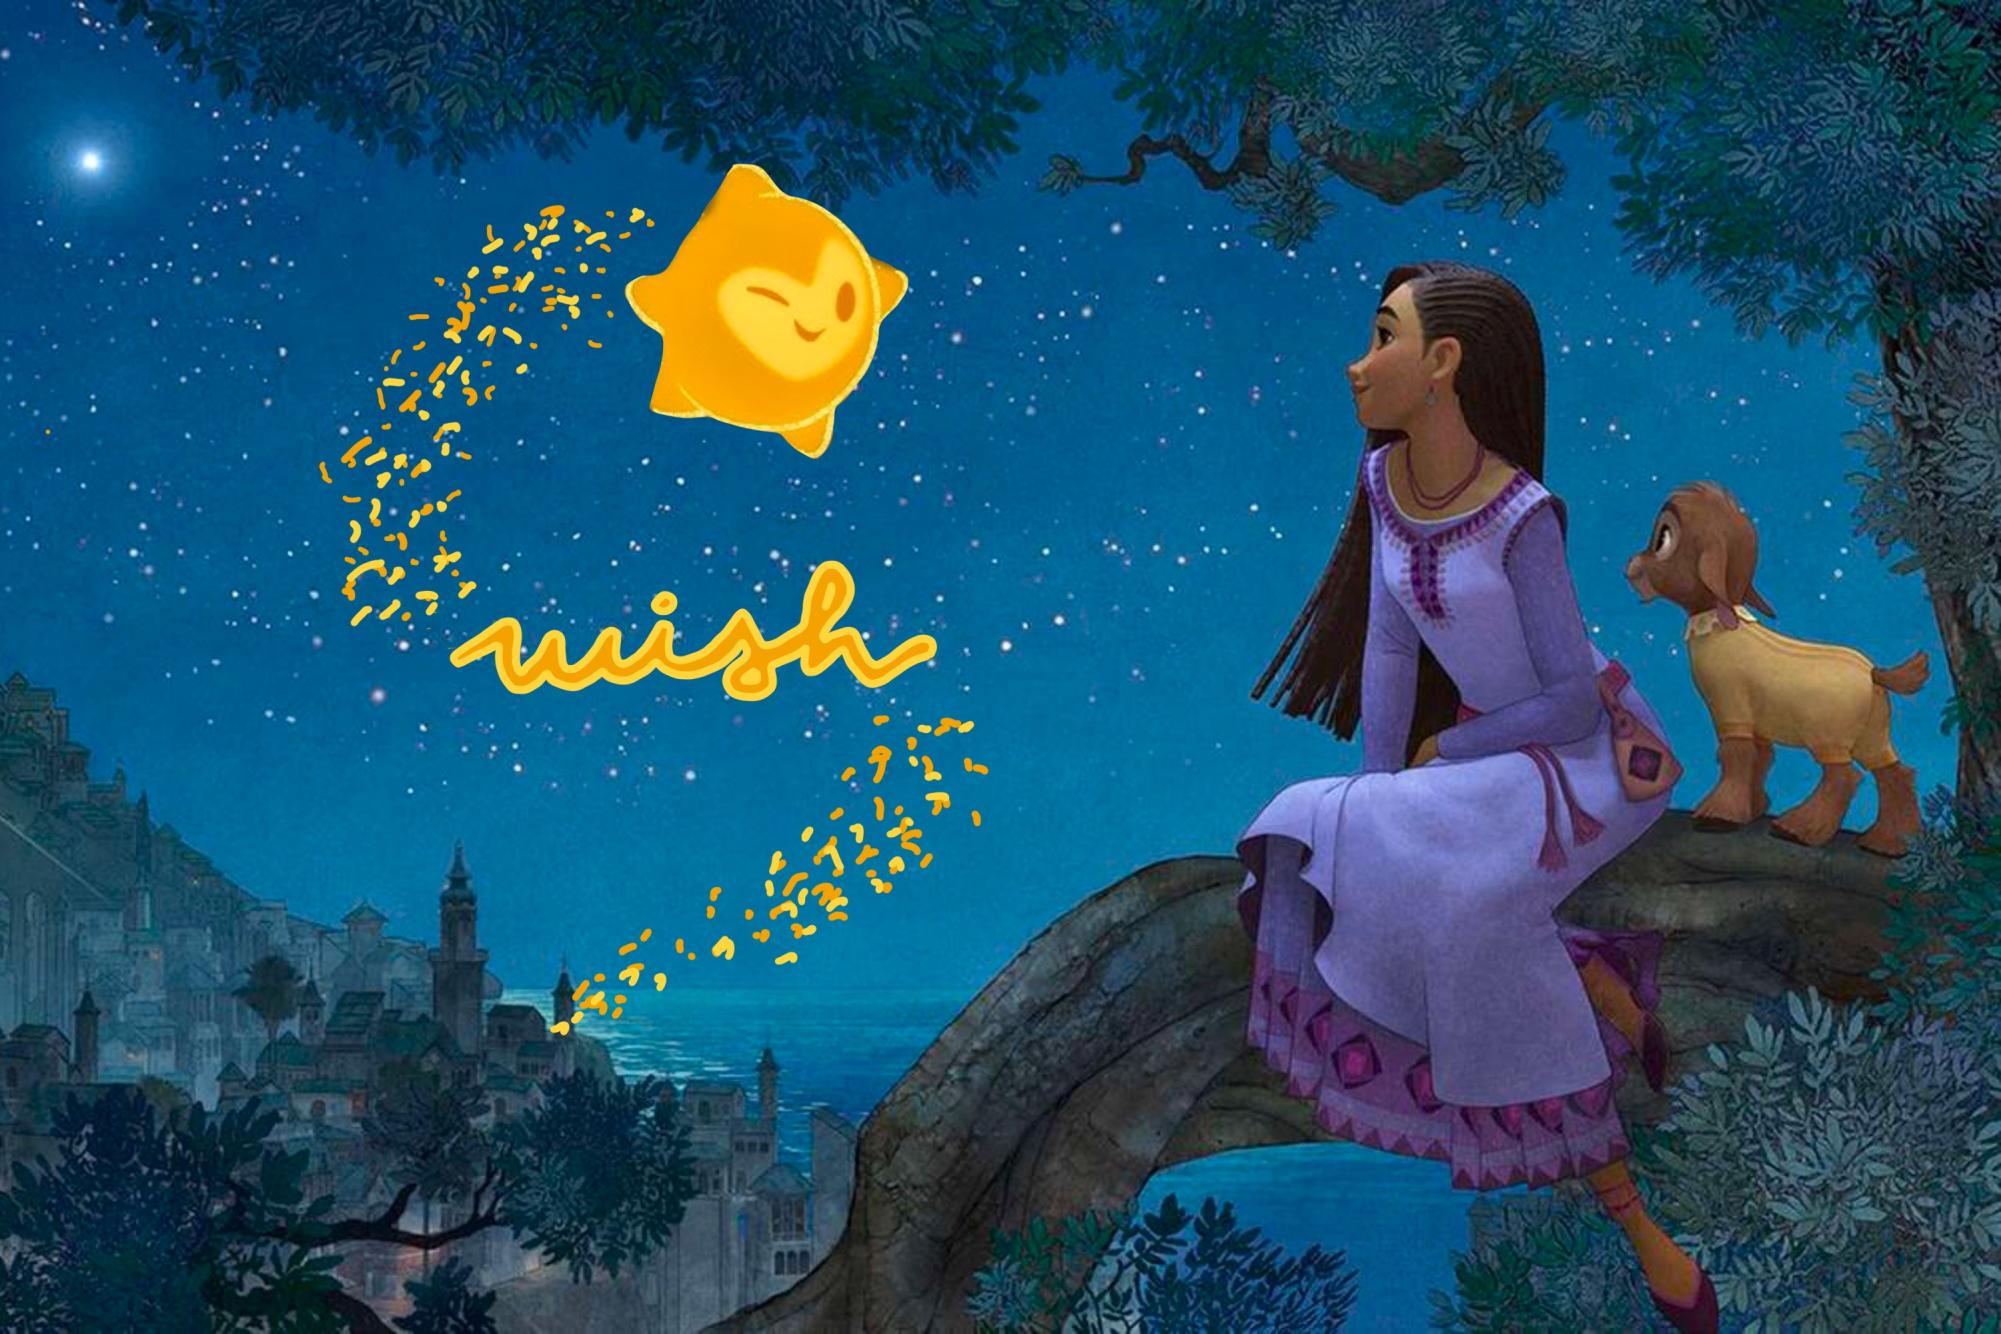 An illustration of a girl wearing a purple dress looking at a large star over a distant village.